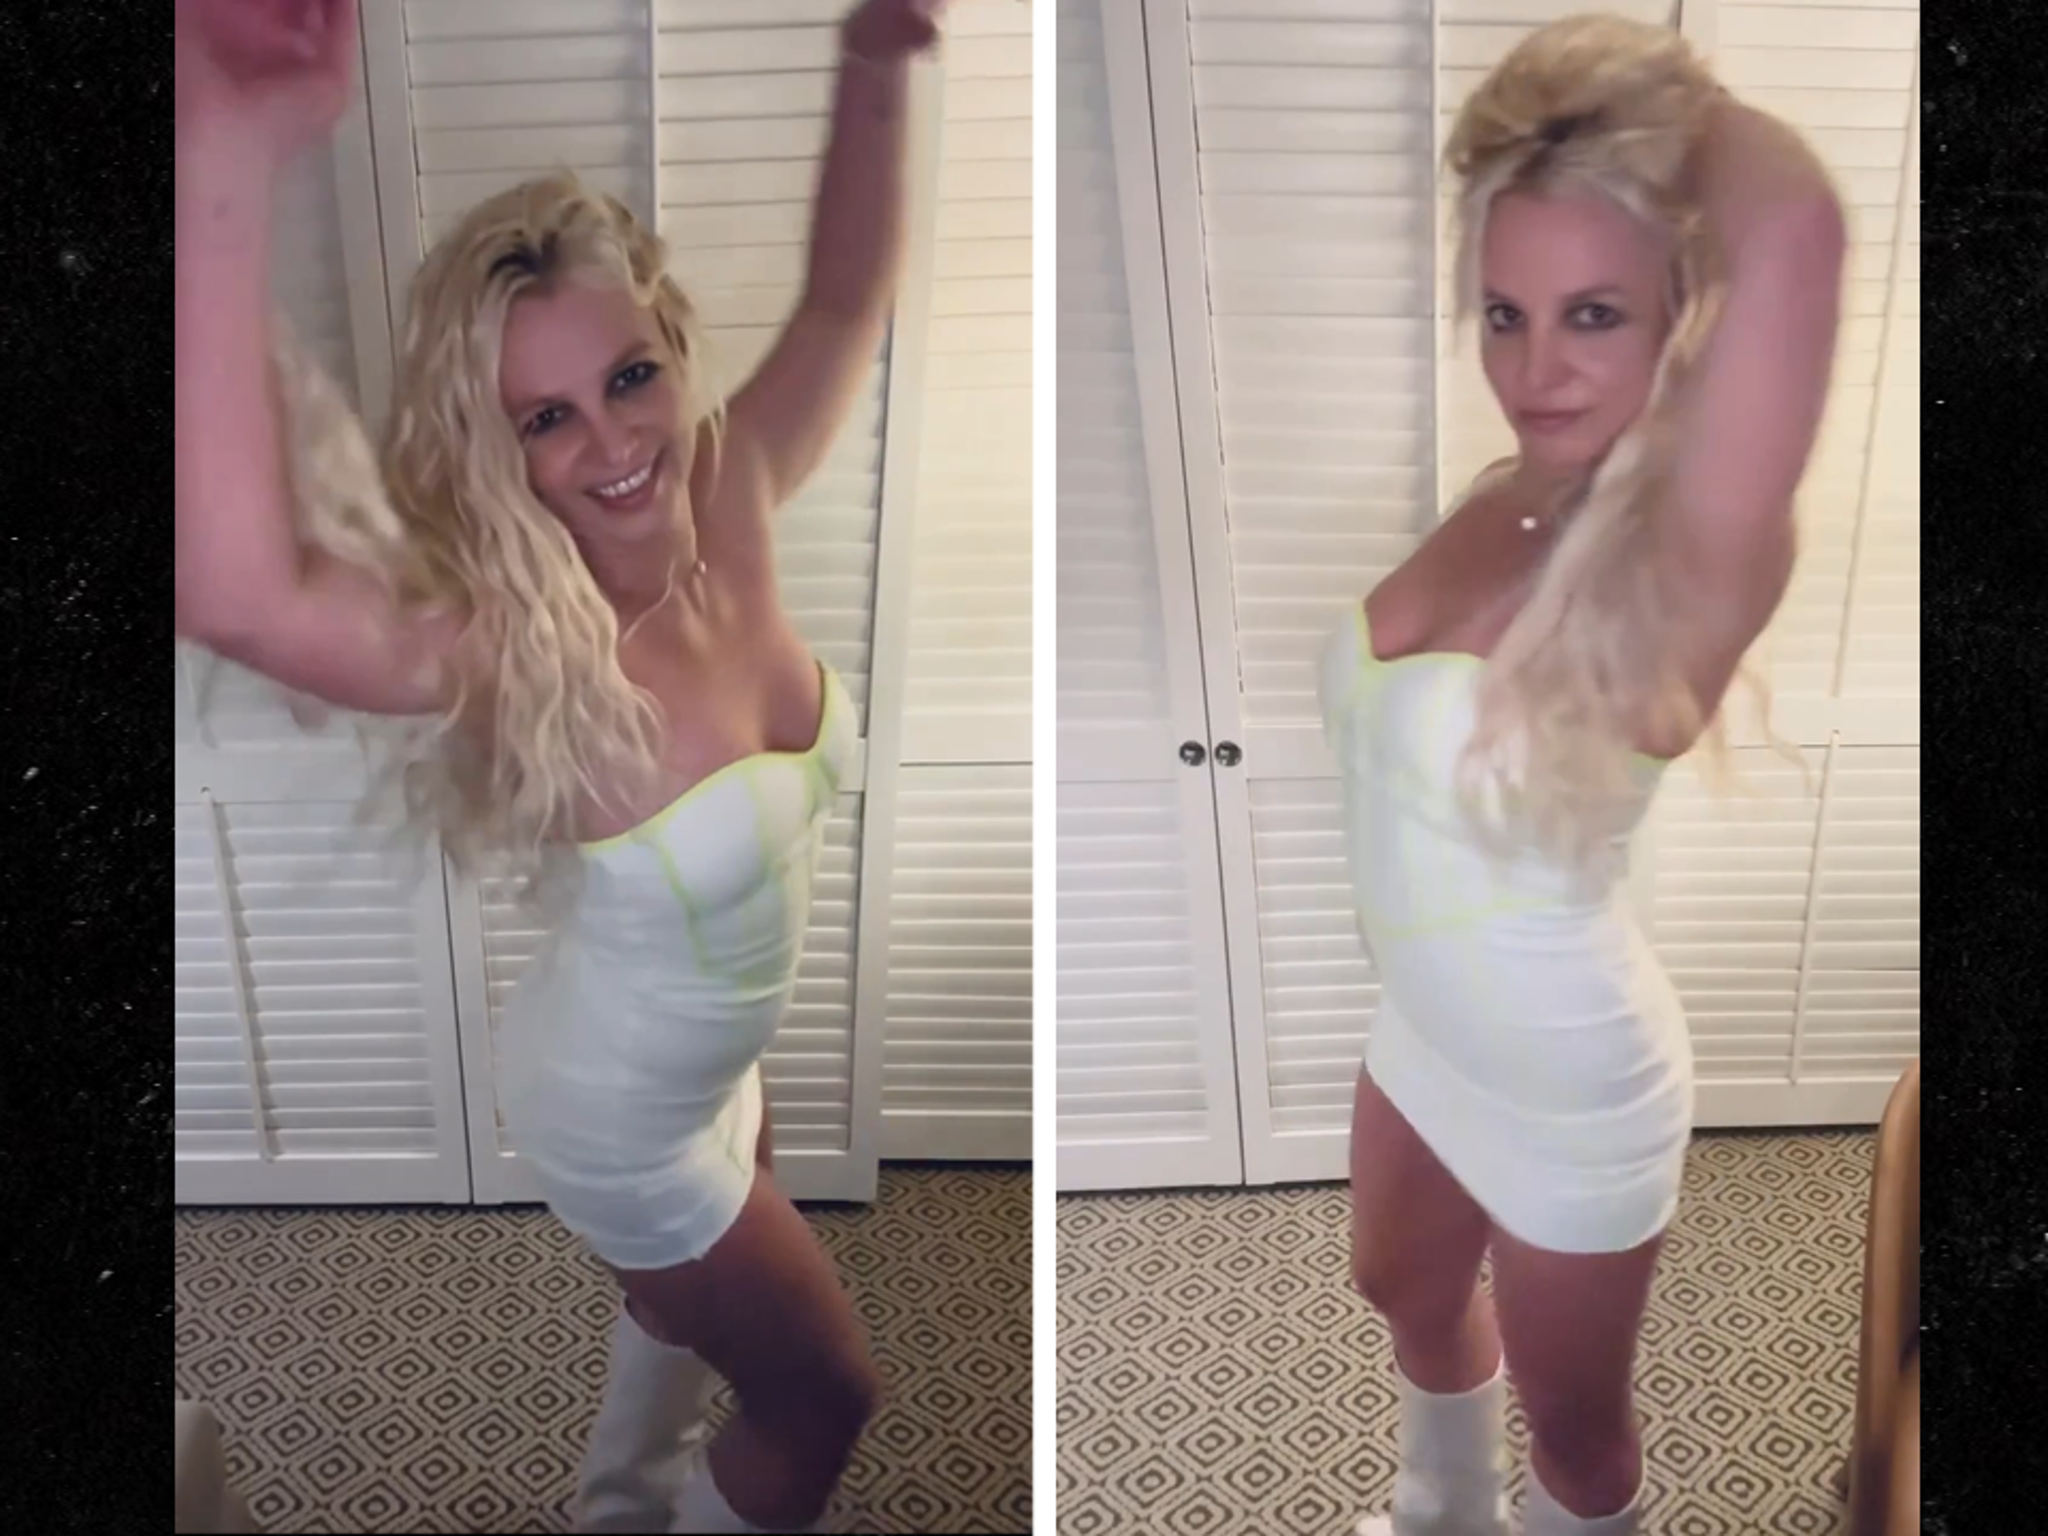 Britney recalling an old shoot from 2001. Why people were so obsessed with  a teen/young adult's boobs is beyond me.😬😬 : r/BritneySpears